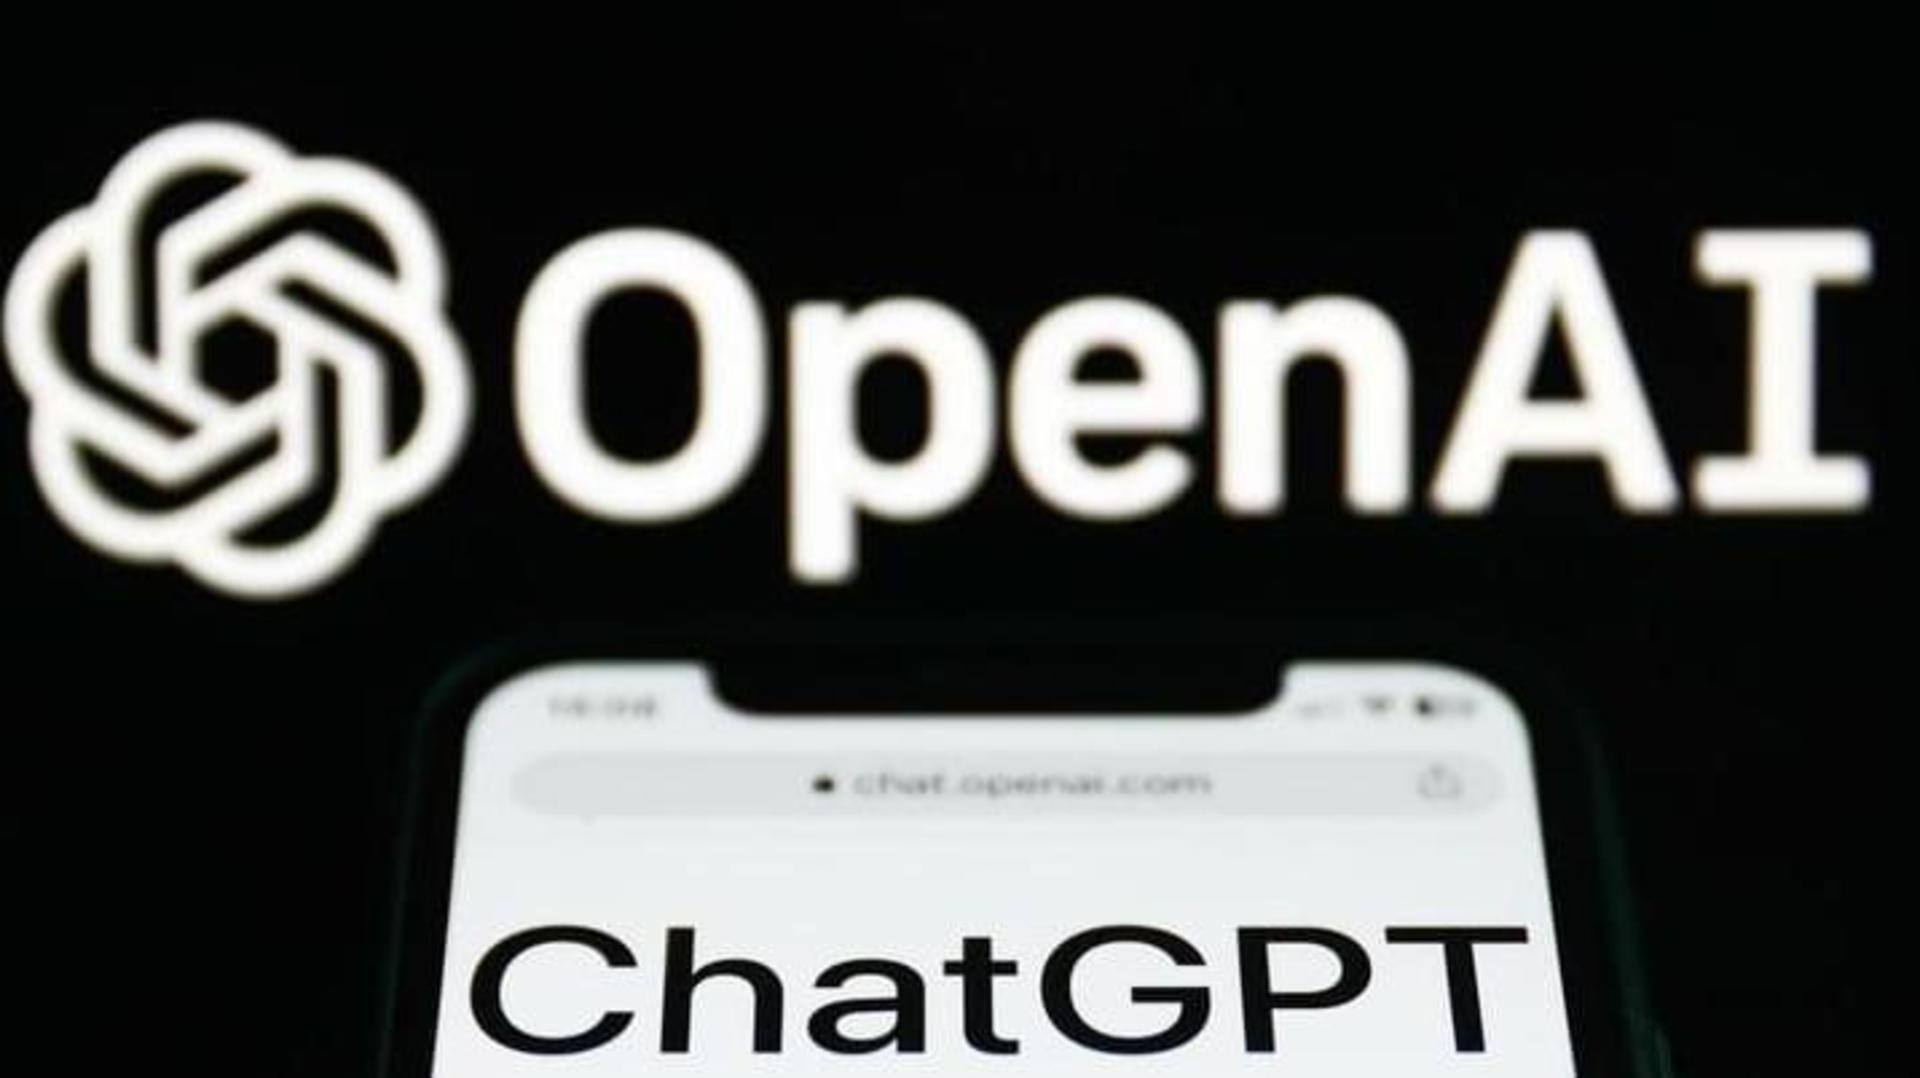 ChatGPT's iOS app can search internet with Bing: Here's how